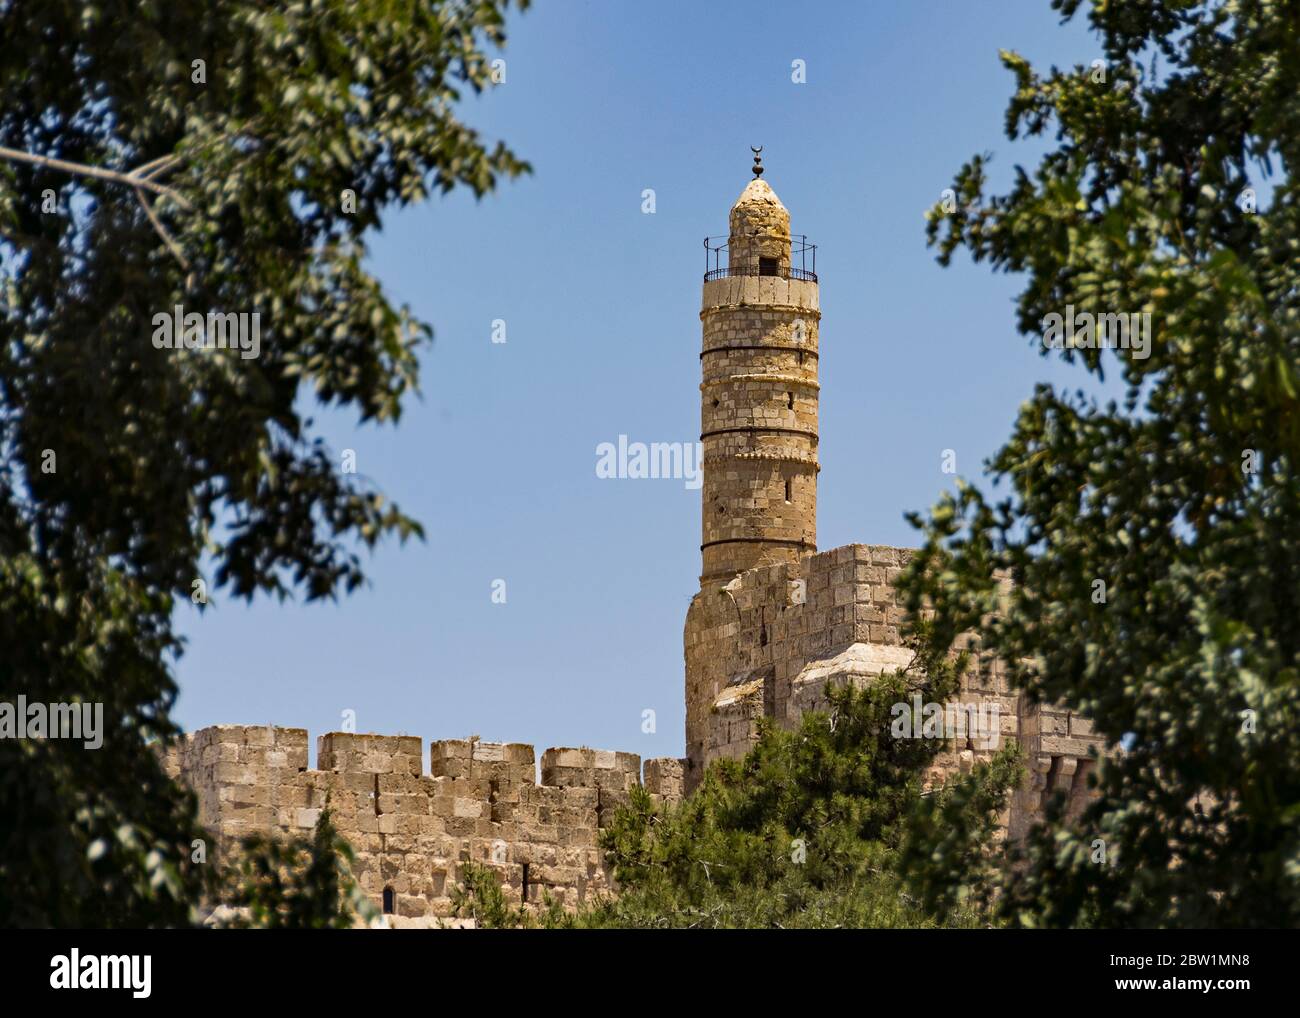 tower of david migdal david citadel mosque and museum in the old city of jerusalem israel framed by blurred foreground foliage Stock Photo